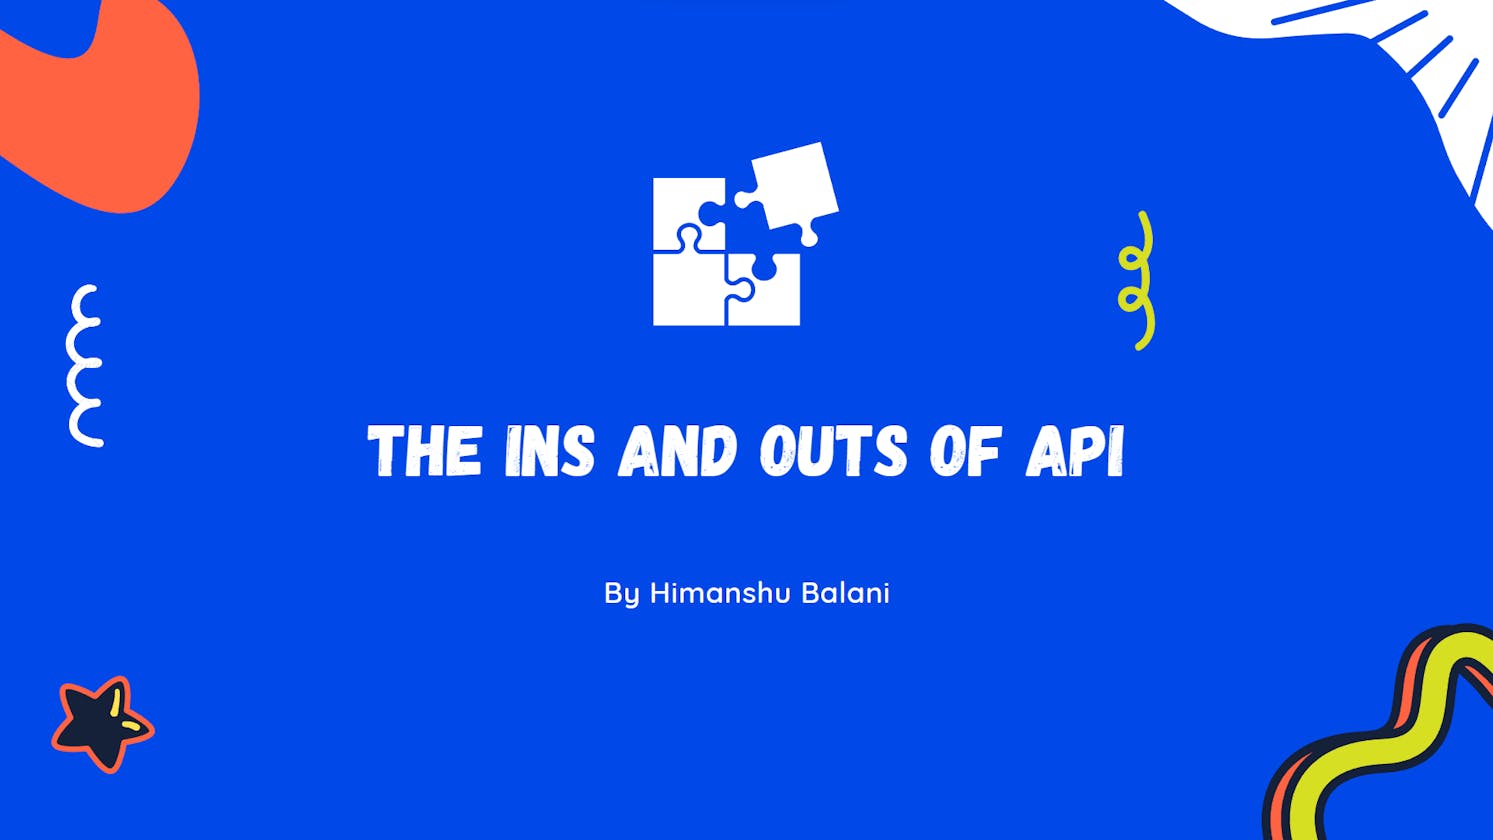 The Ins and Outs of APIs